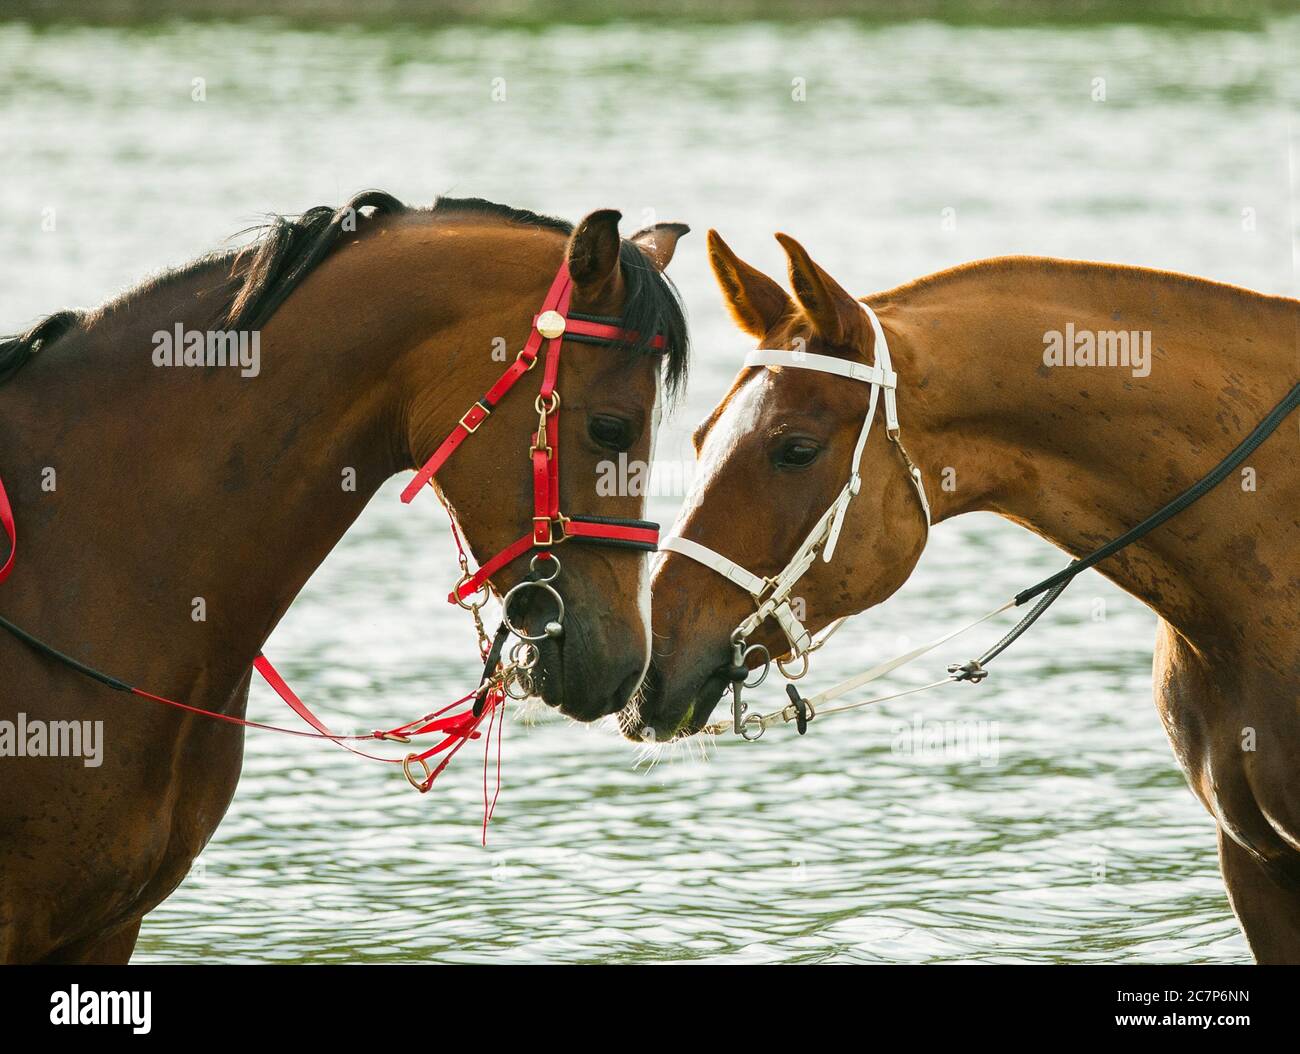 Two race horses communicating with water on background Stock Photo